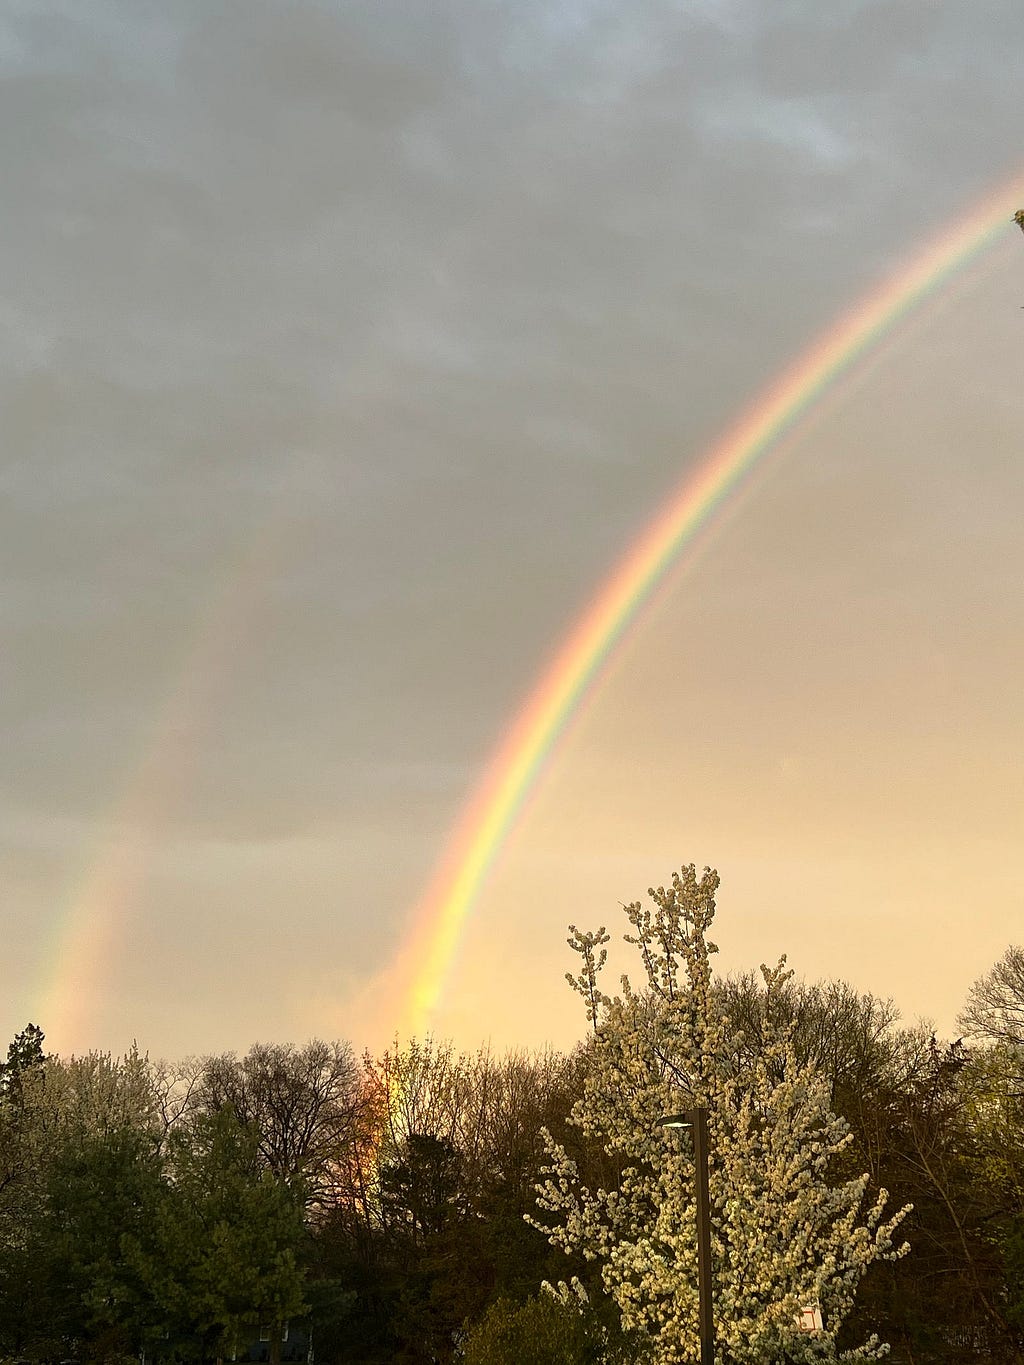 A double rainbow captured at sunset just after a rainstorm.